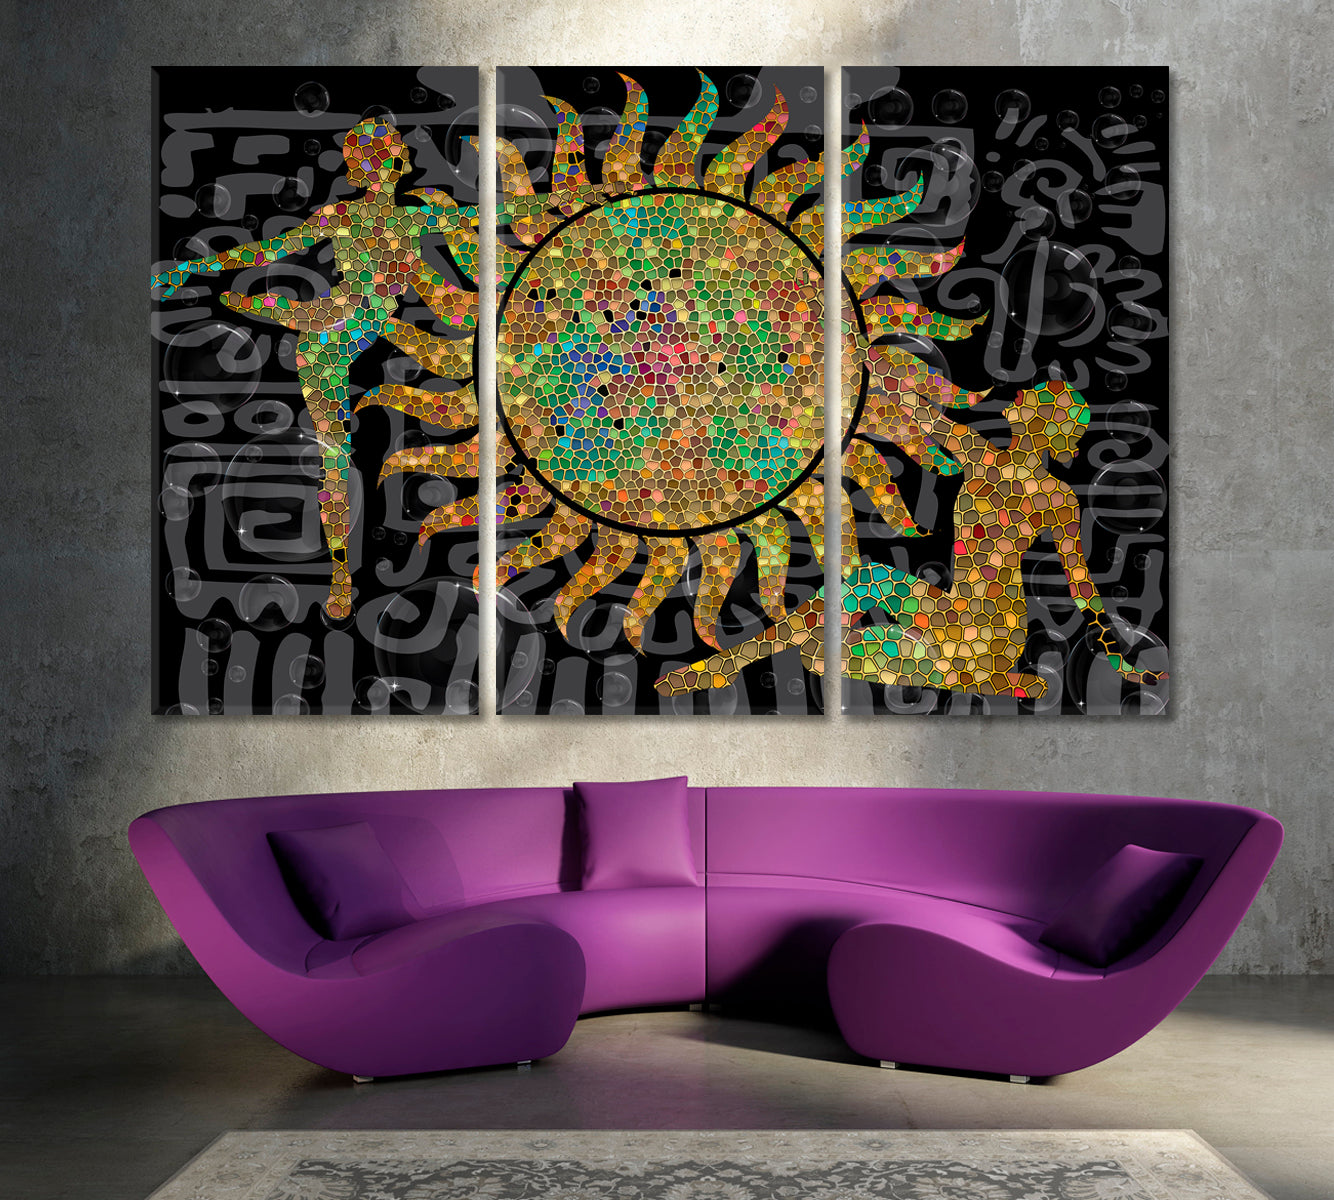 SOLAR ENERGY Constructive Abstract Figurative Boho Pattern Collage Contemporary Art Artesty 3 panels 36" x 24" 